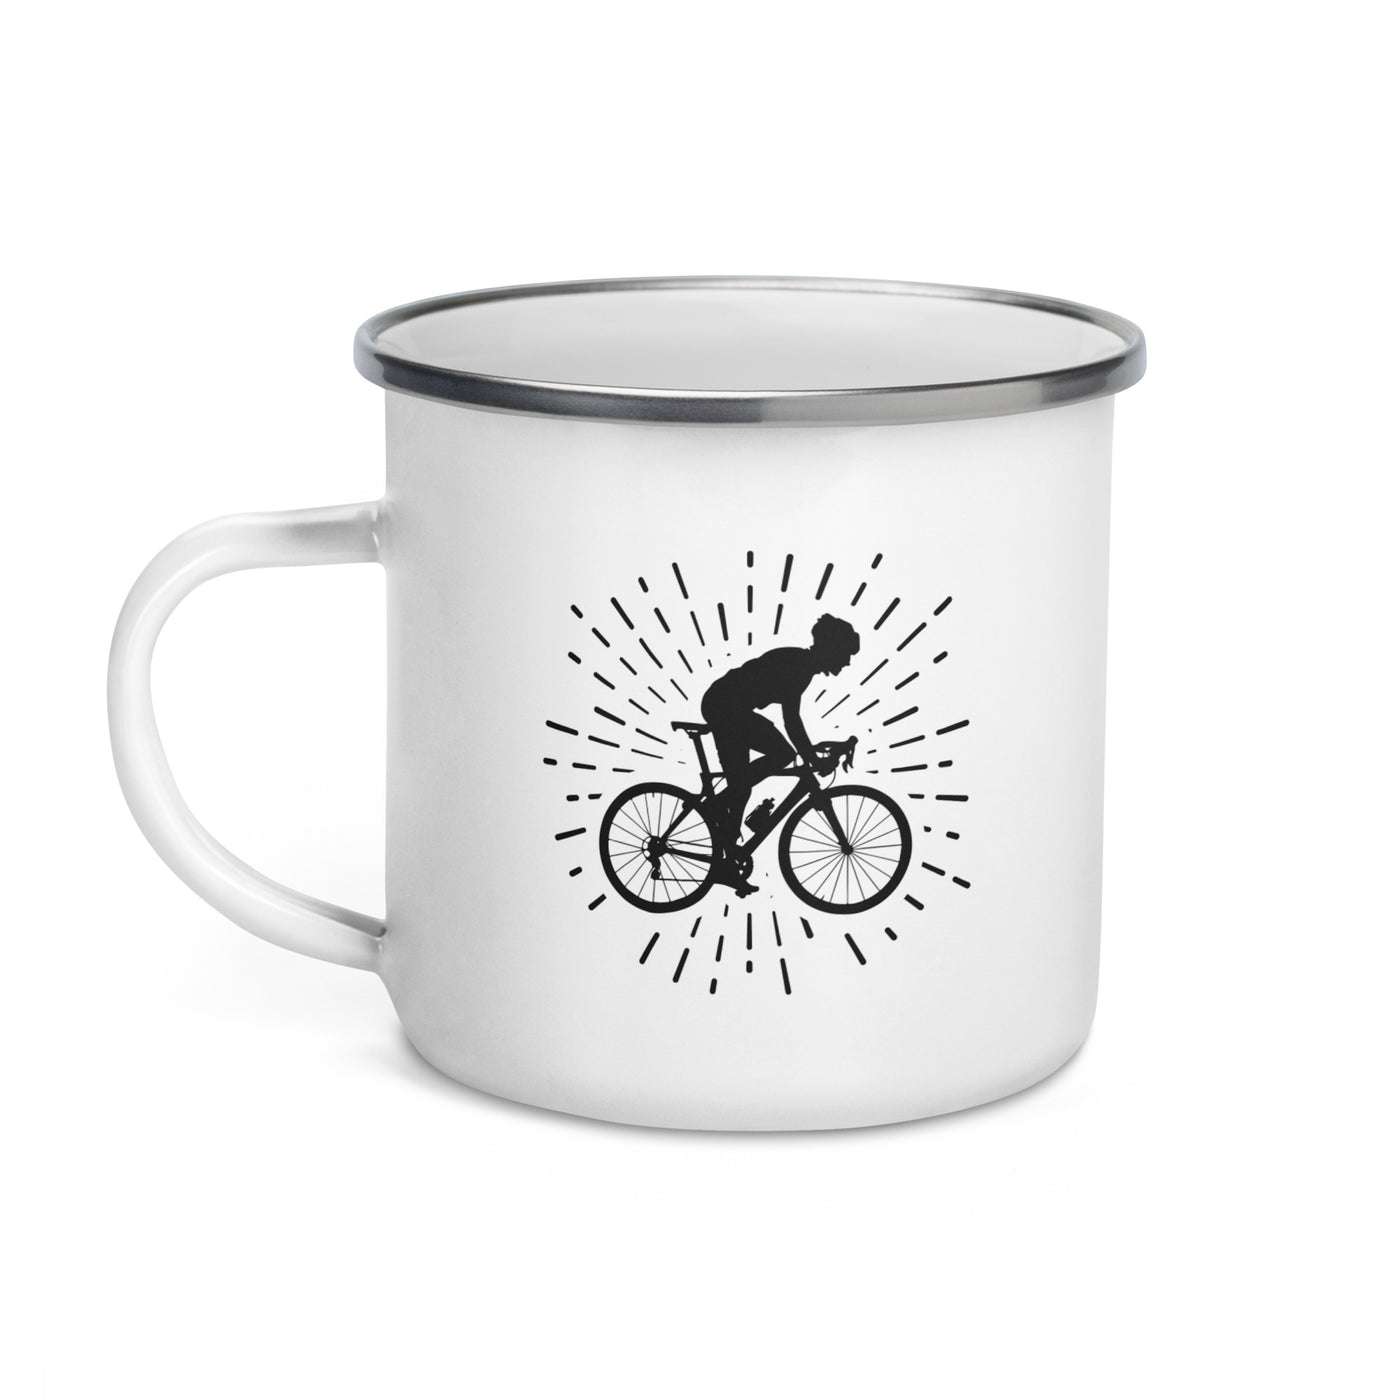 Firework And Cycling 1 - Emaille Tasse fahrrad